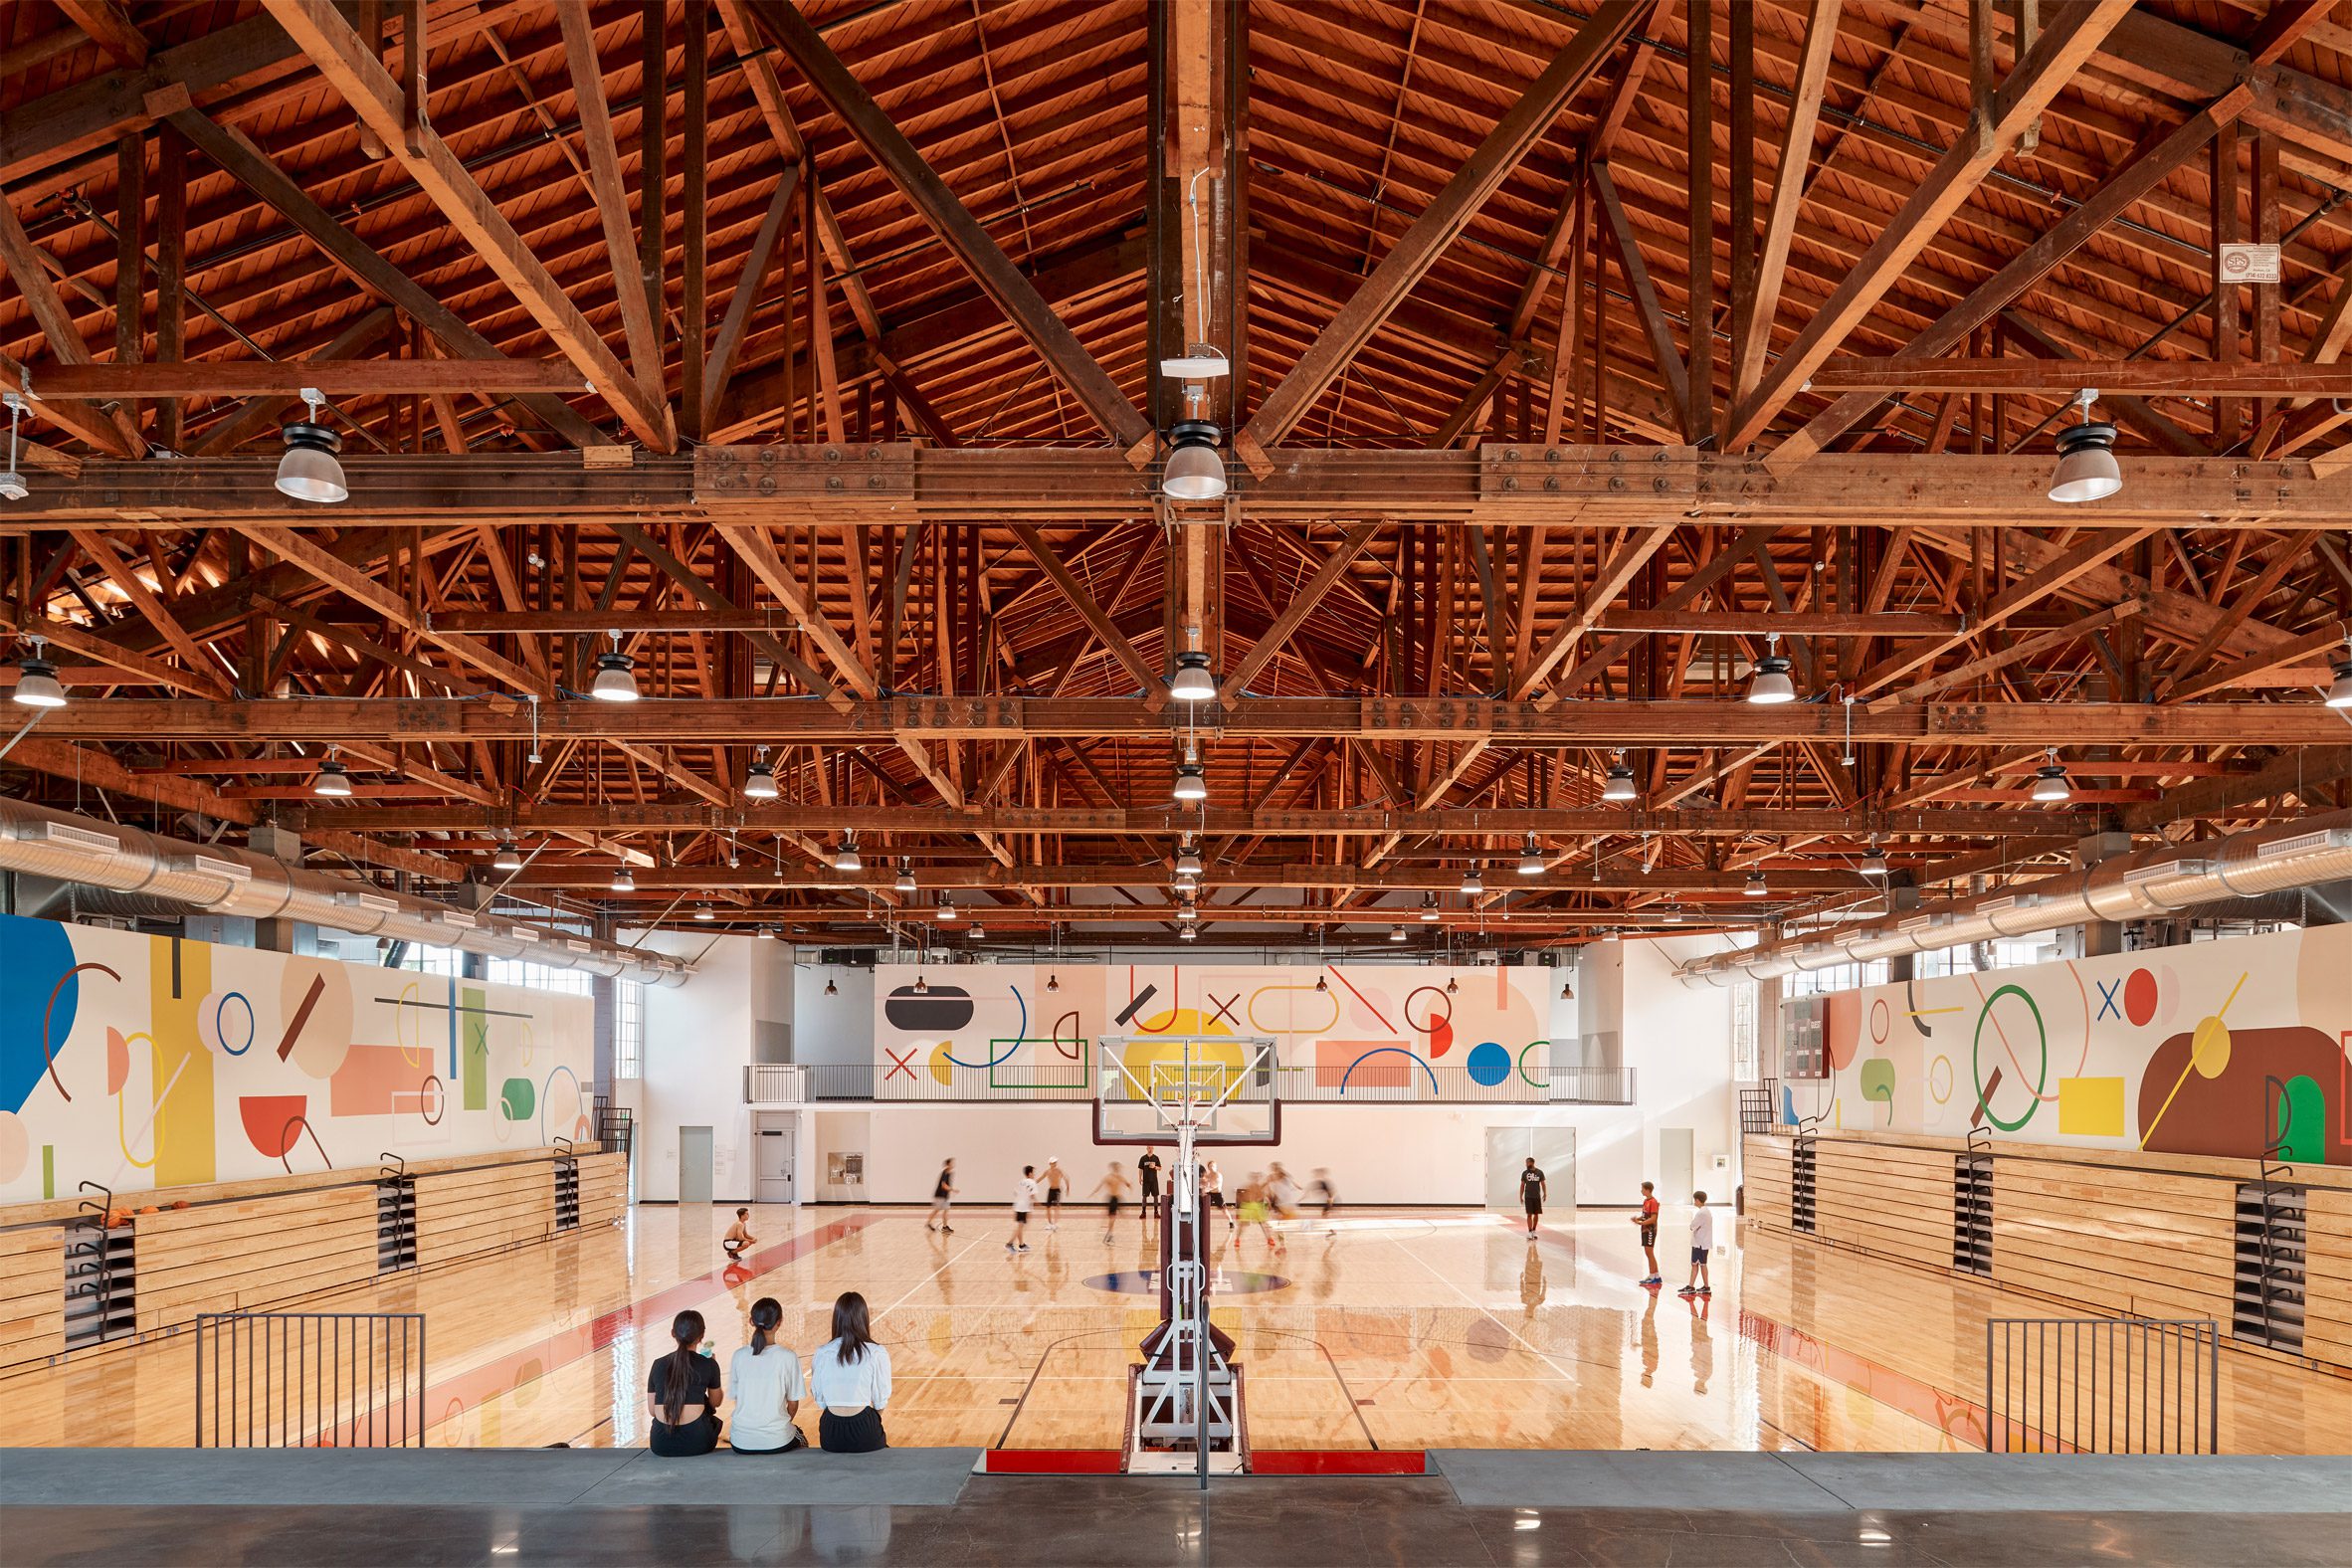 School gymnasium by Gensler and EF Education First